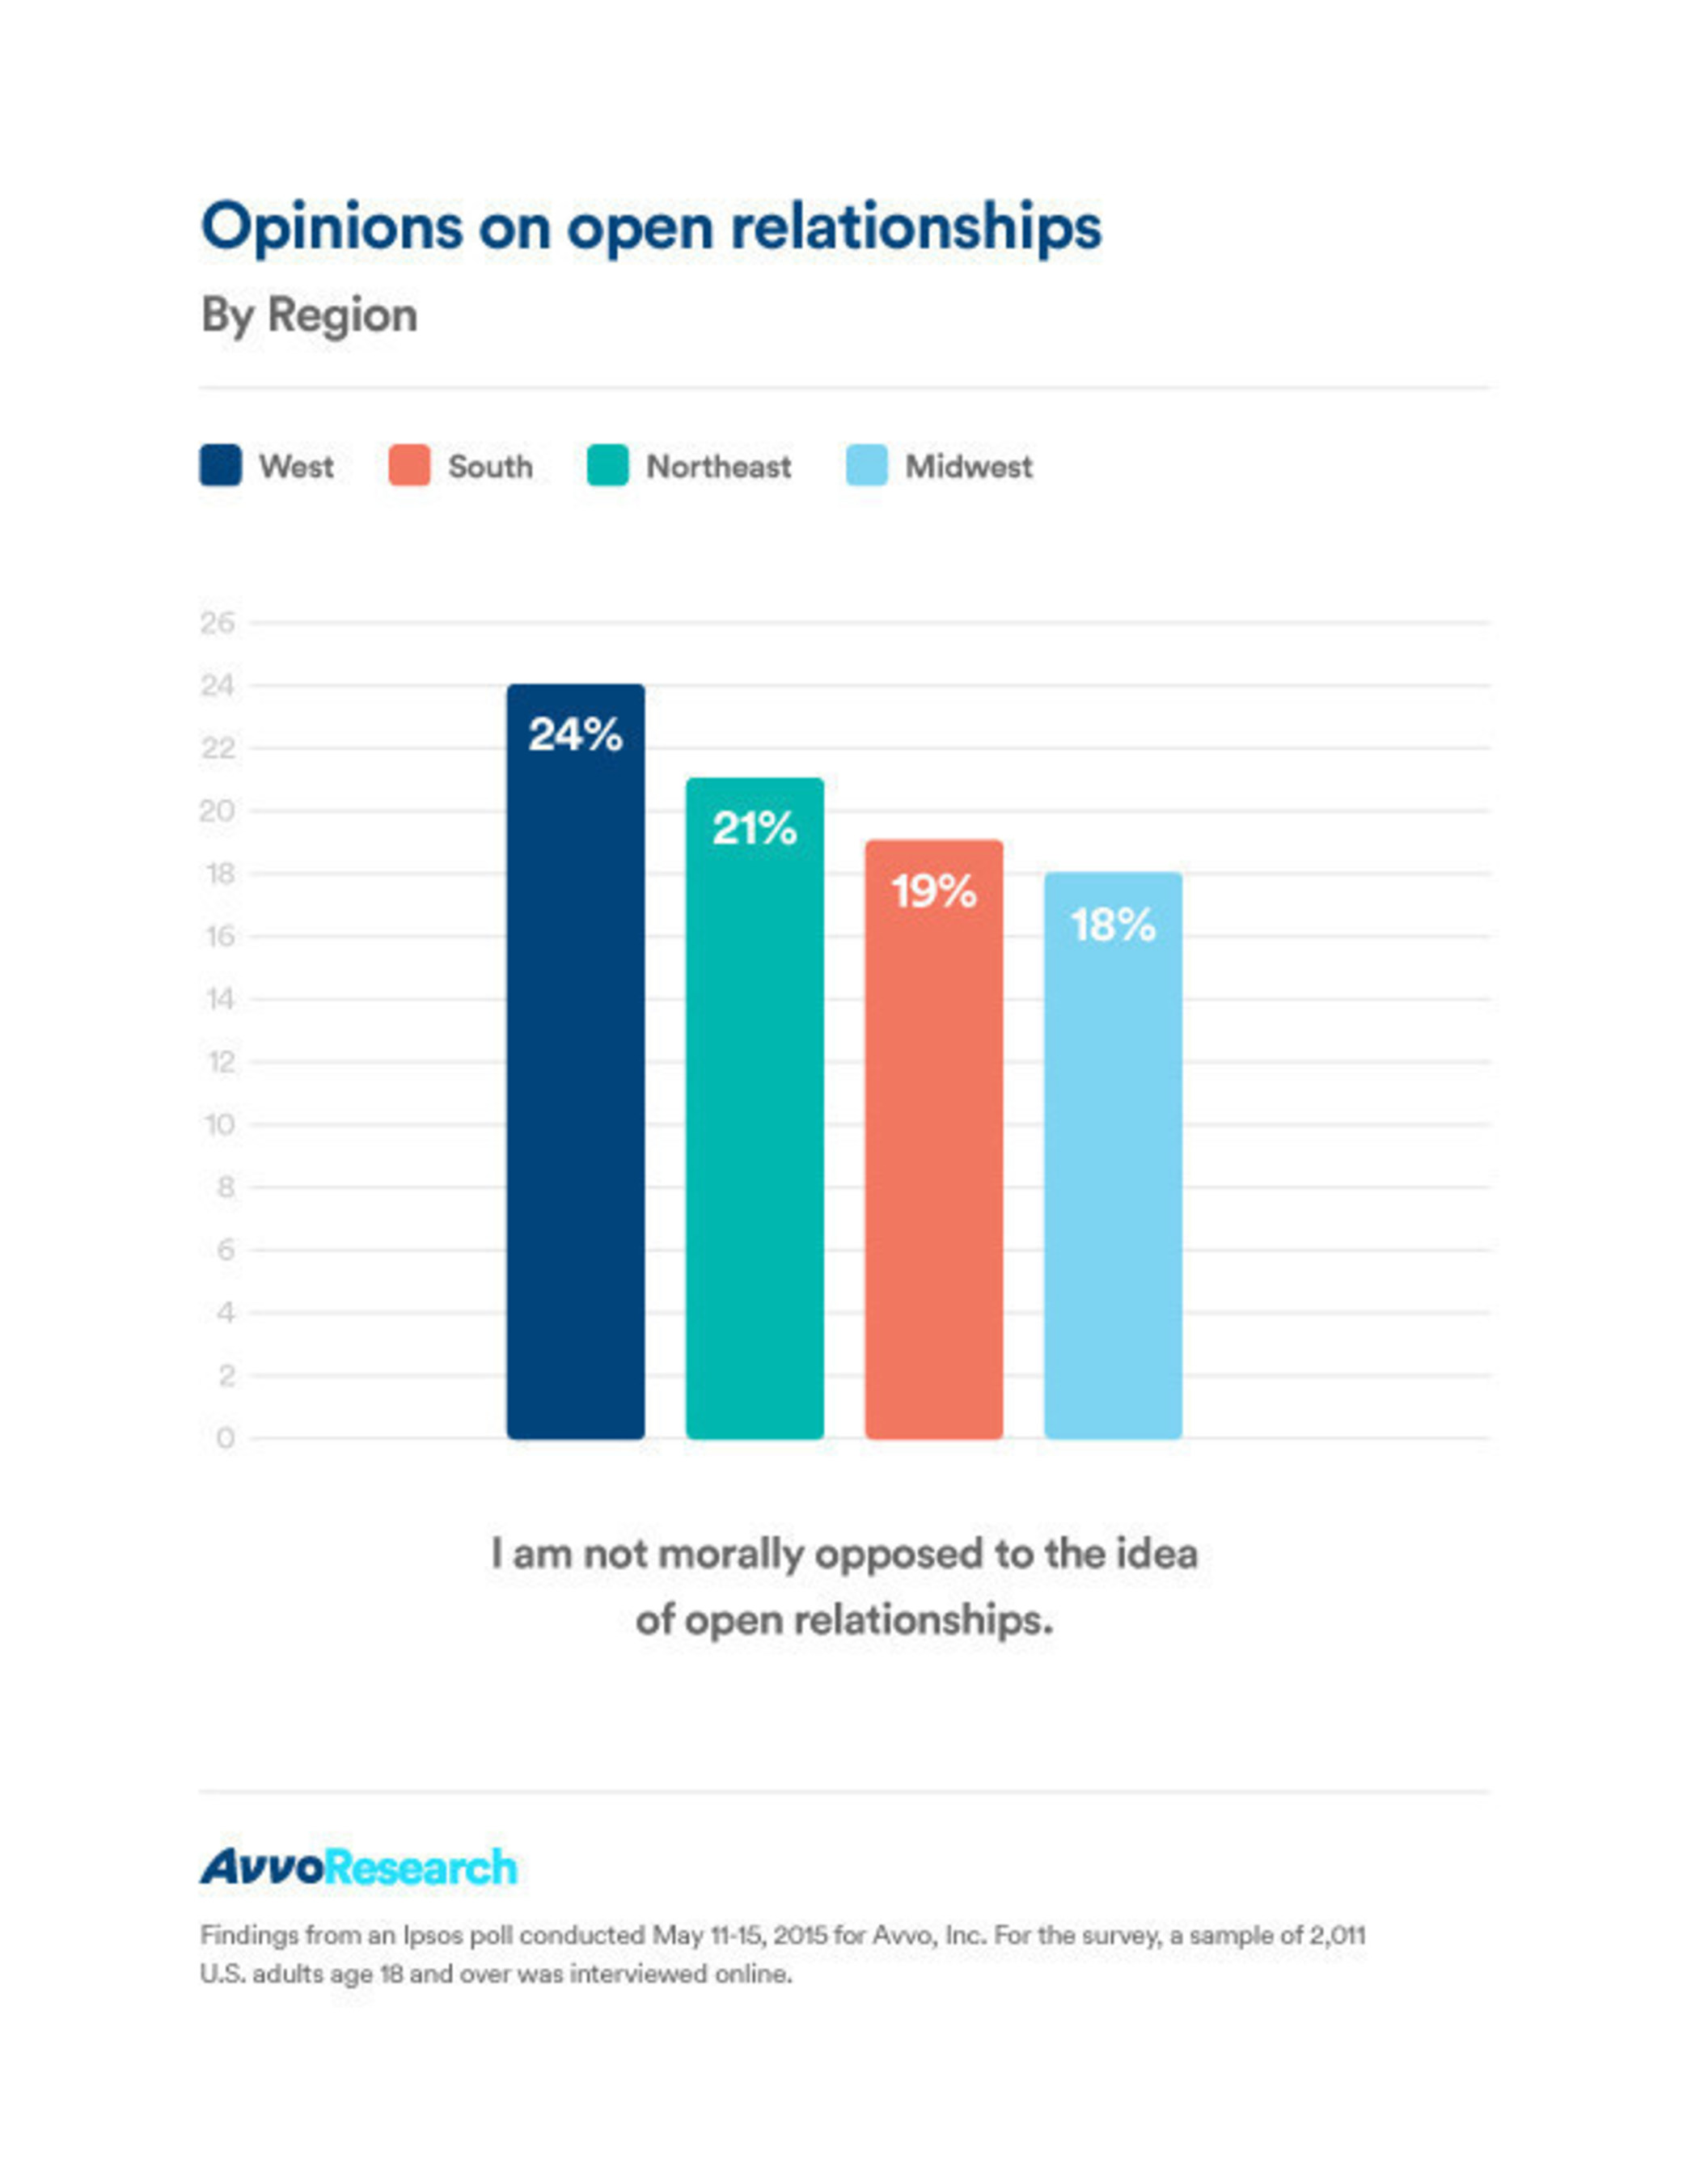 Opinions on open relationships: By Region: West, South, Northeast, Midwest. "If my partner wanted an open relationship, I would leave him/her" or "I am morally opposed to the idea of open relationships." Avvo Research 2015